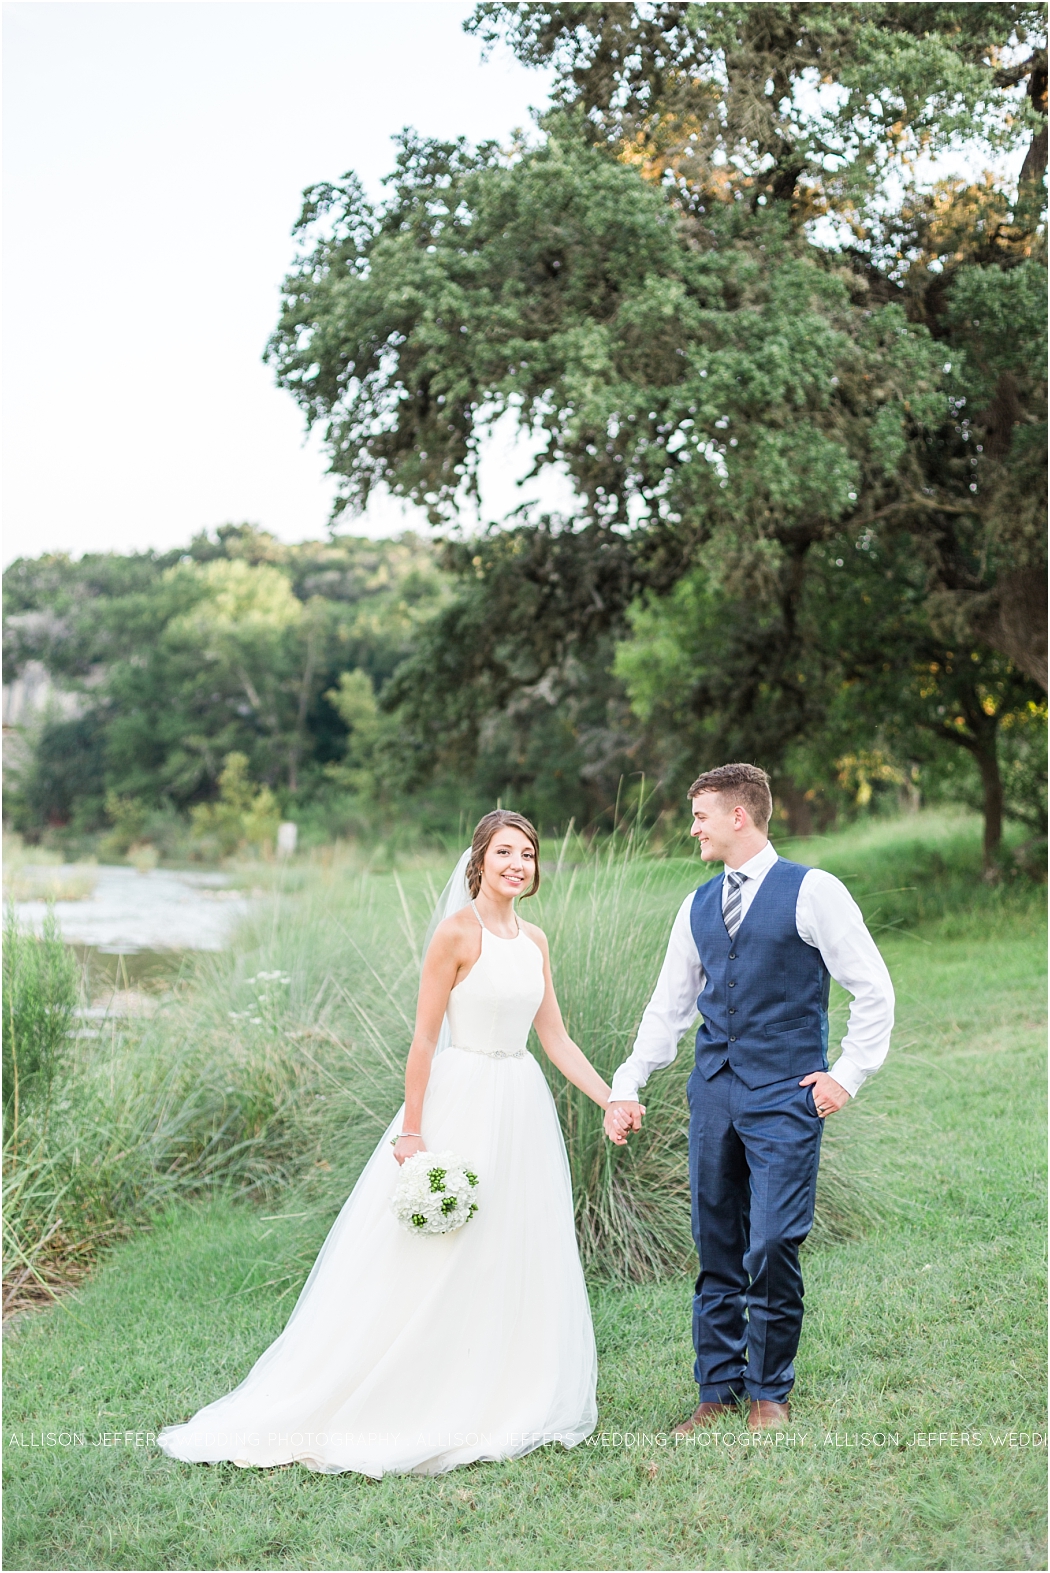 Concan wedding at Lightning bug springs. Texas Hill Country Wedding Venue_0072